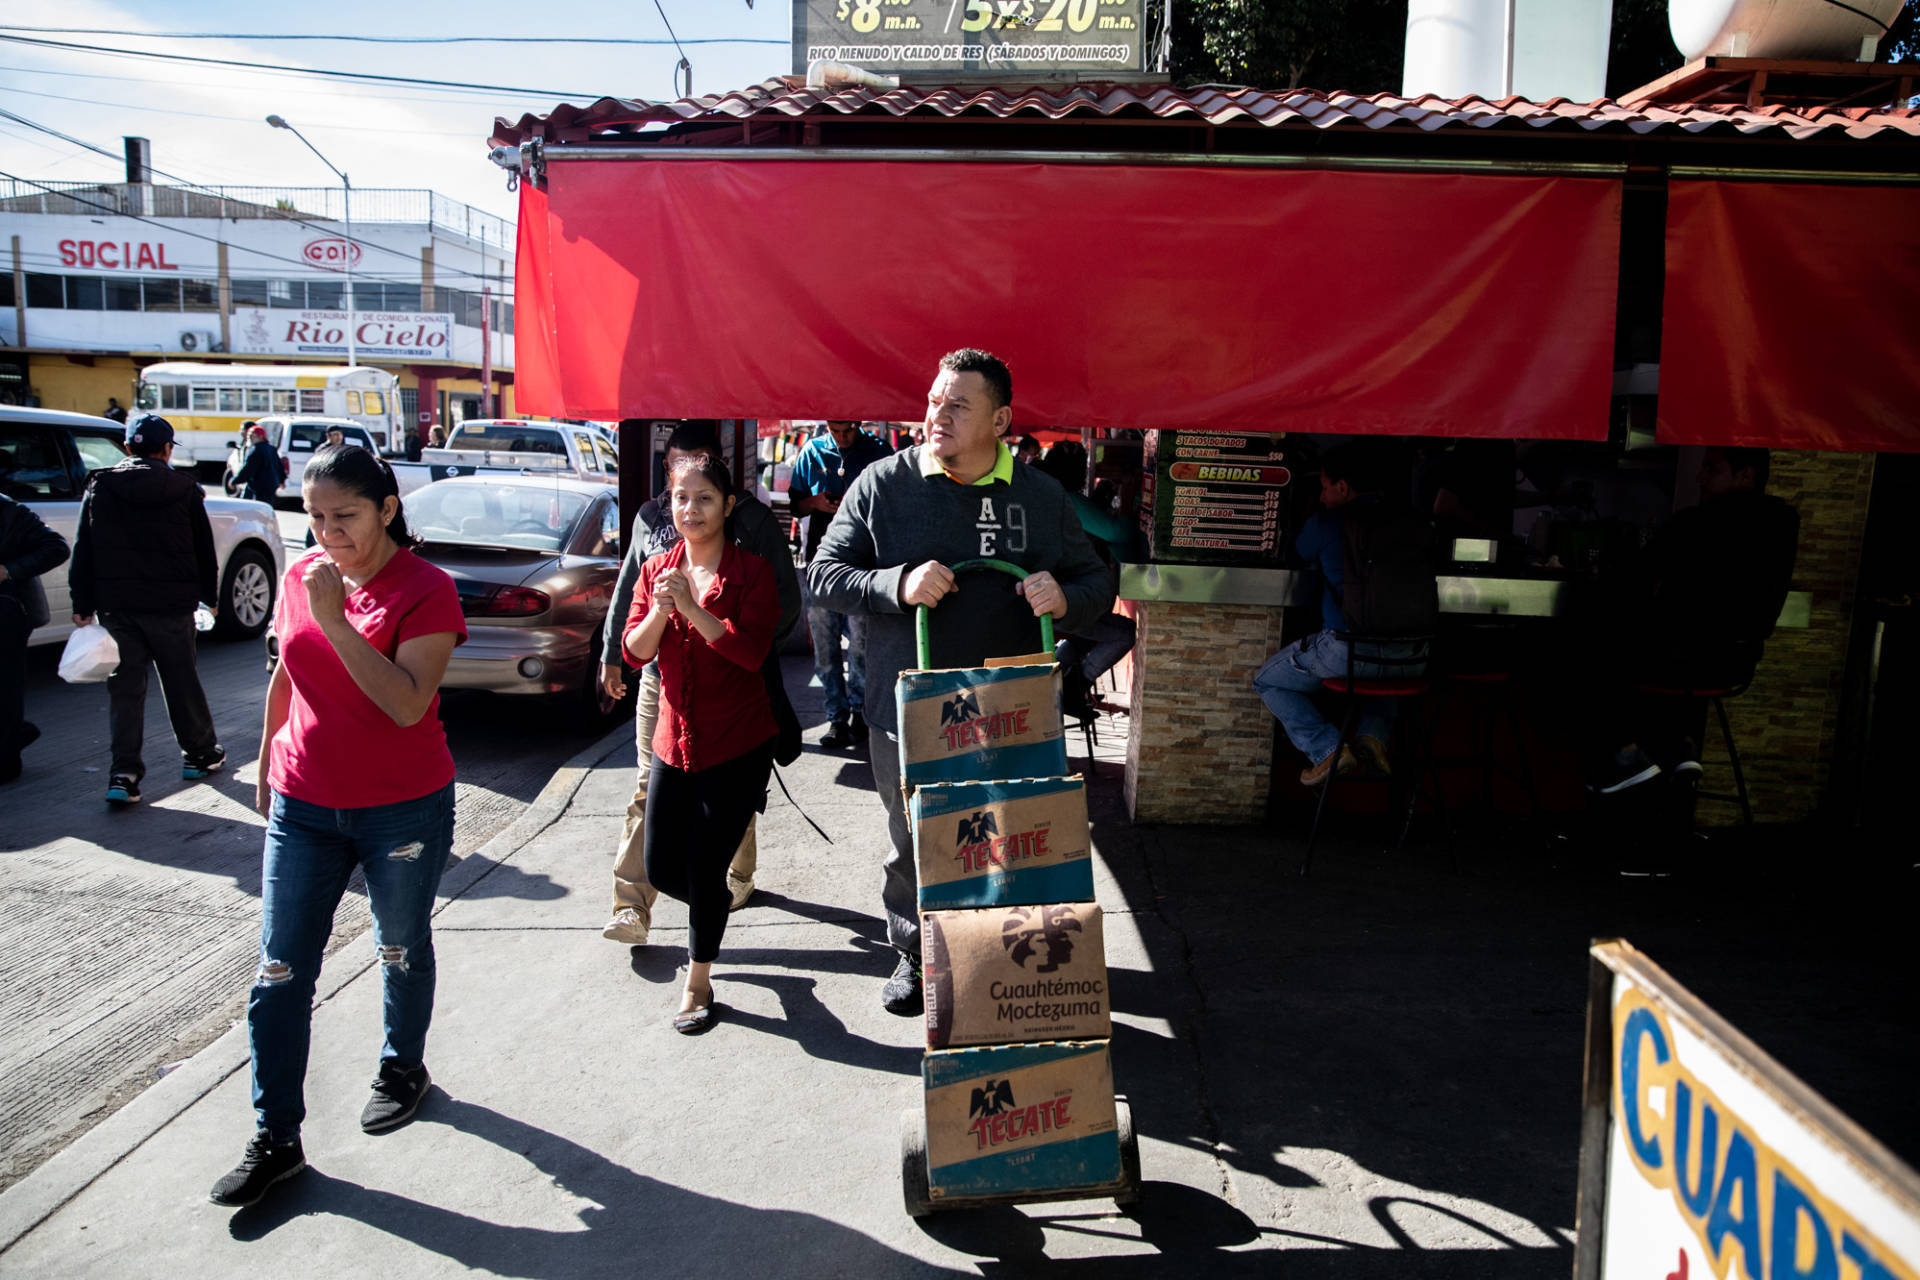 José Aguilar heads to the store on a supply run in Tijuana, Mexico. His restaurant Honduras 504 has become a community center for Honduran legal residents and unauthorized migrants alike. Tomás Ayuso for NPR